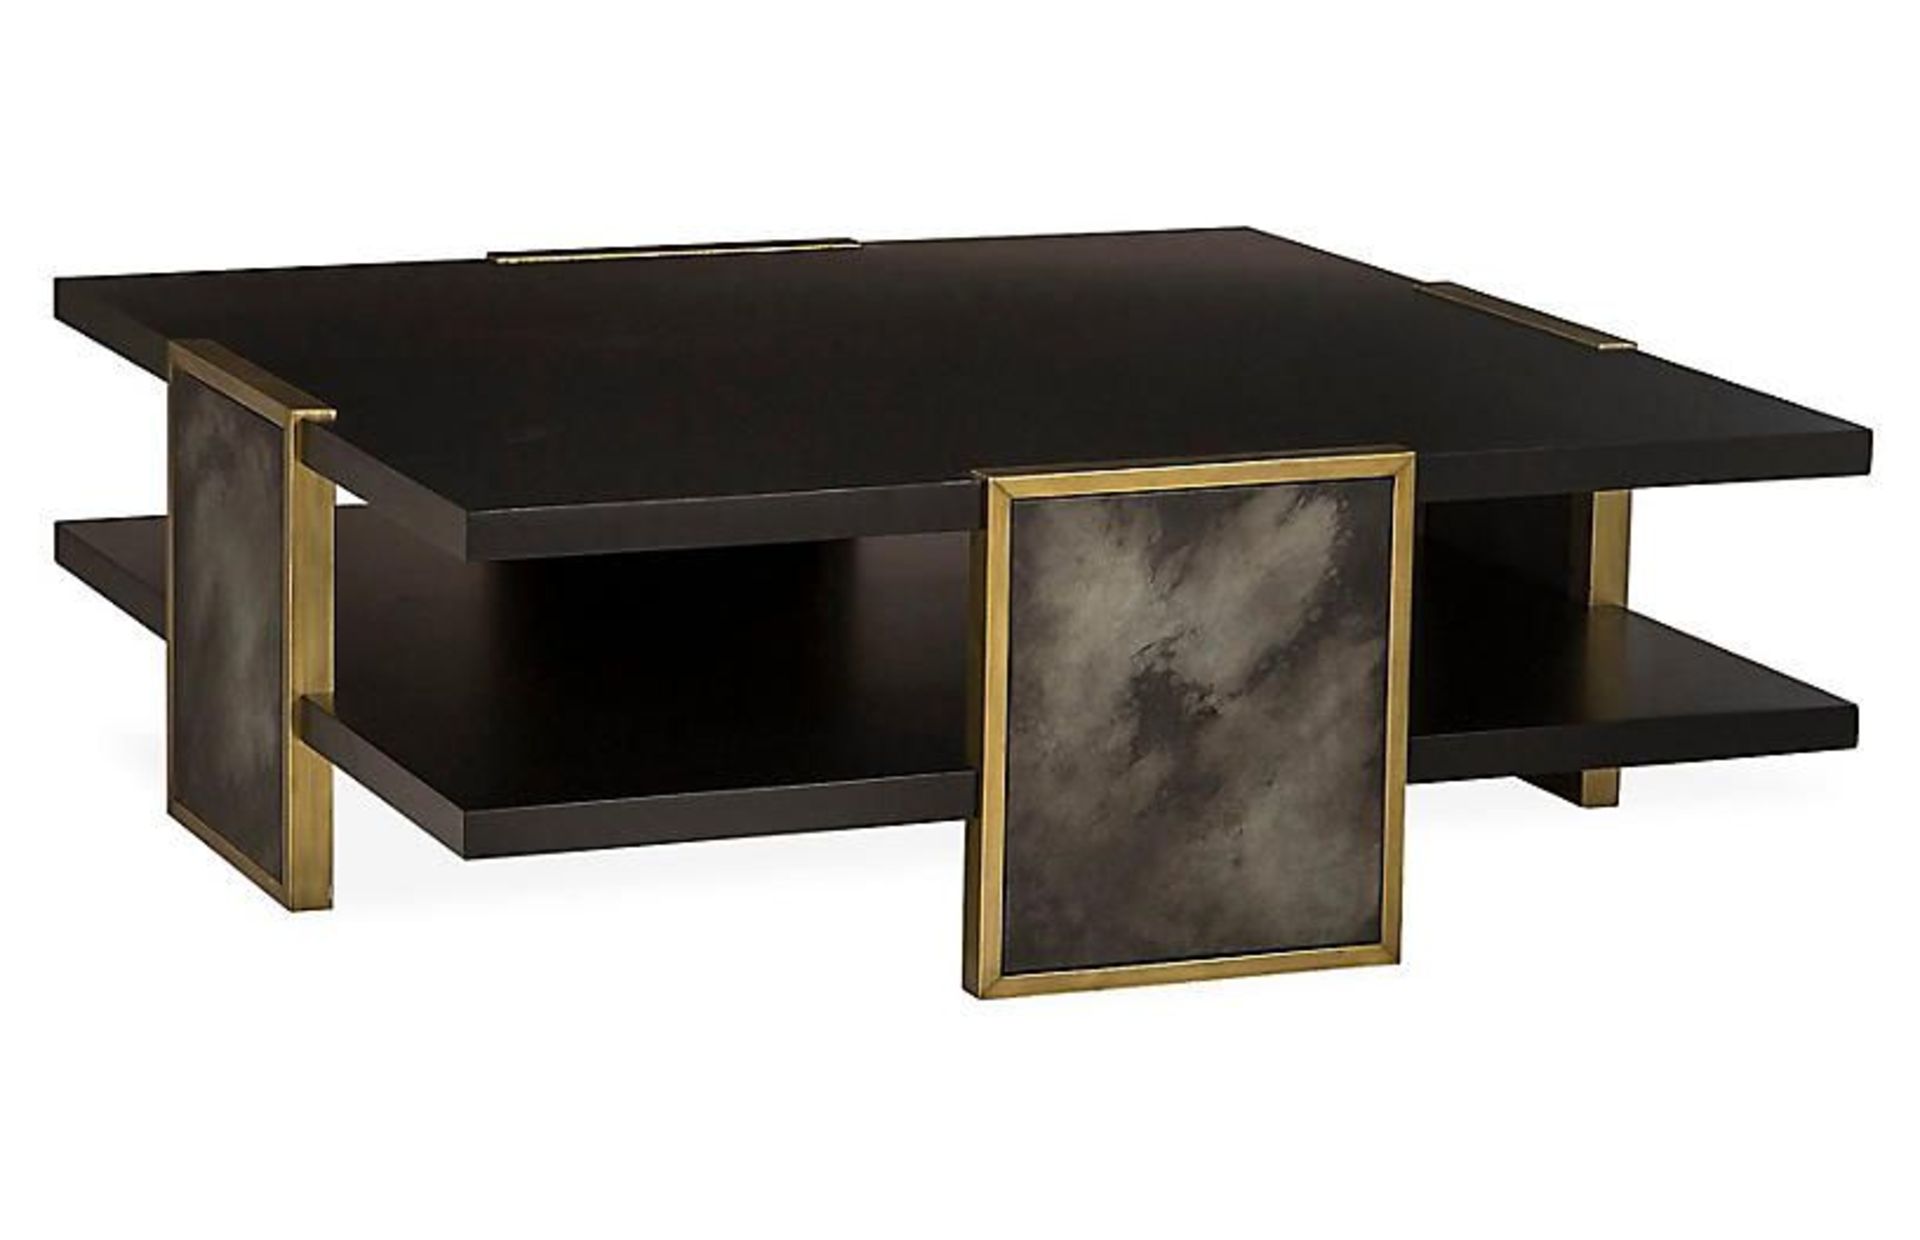 Knox Coffee Table Thoughtfully Designed With Two Stacked Shelves And Textural Leather-Like Legs - Image 4 of 4